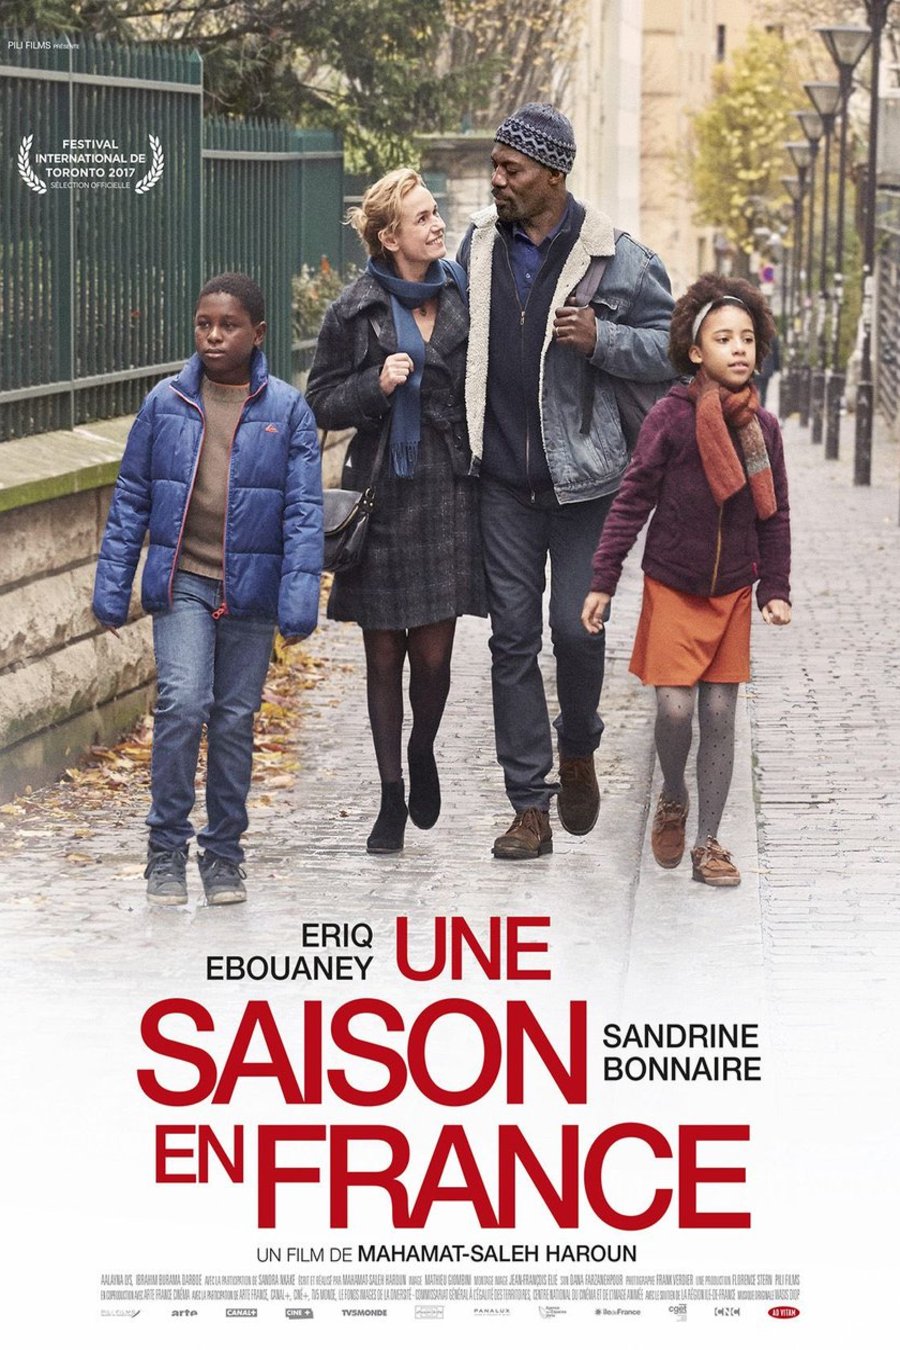 Poster of the movie A Season in France